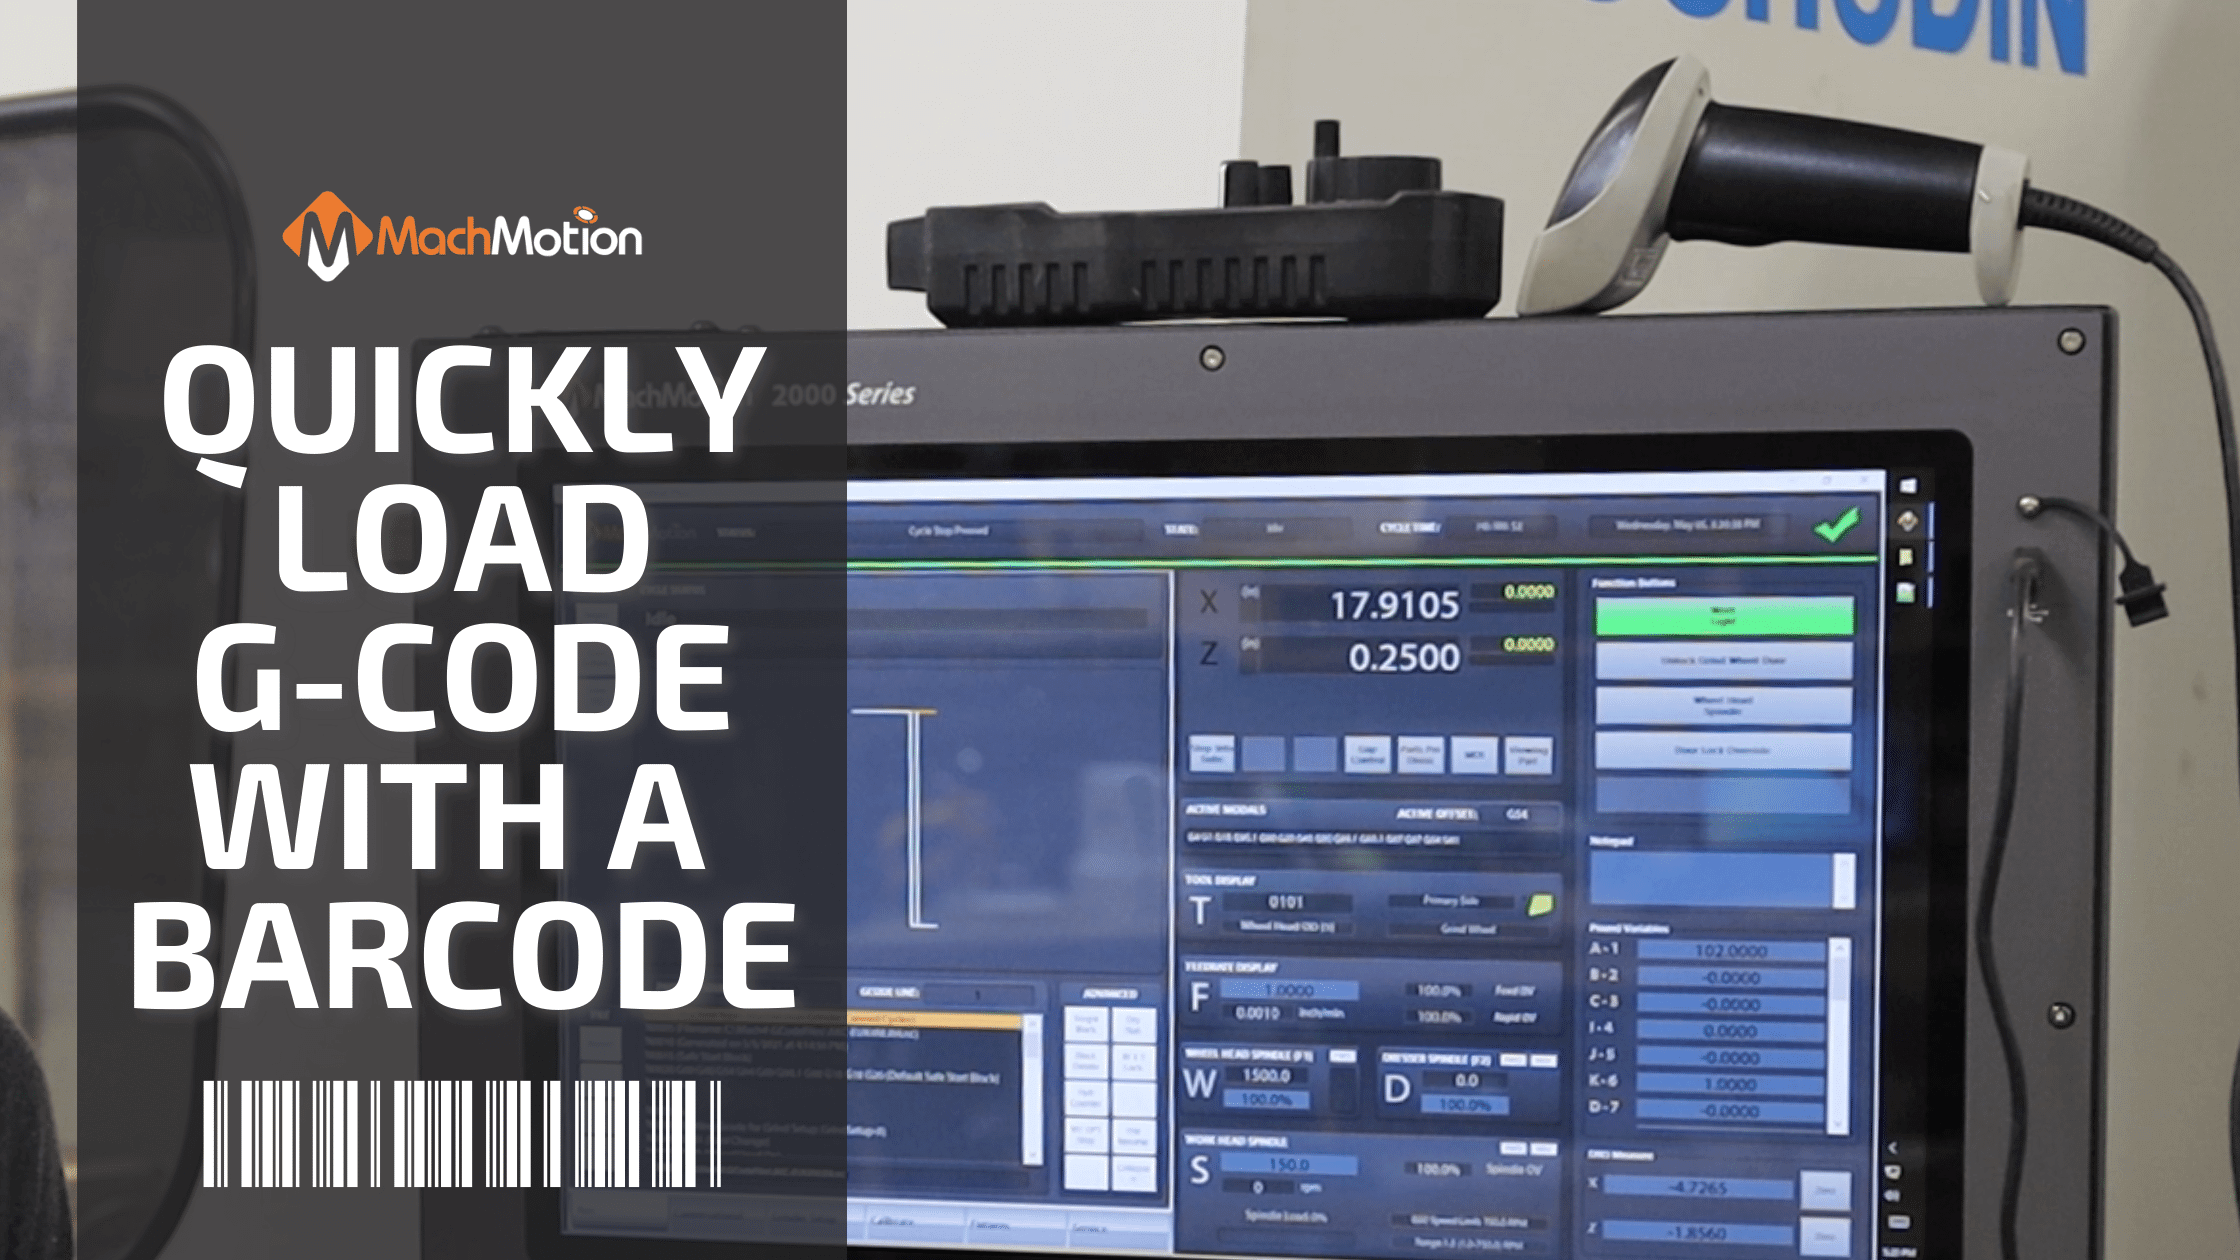 GCode Barcode Scanner With MachMotion Controller